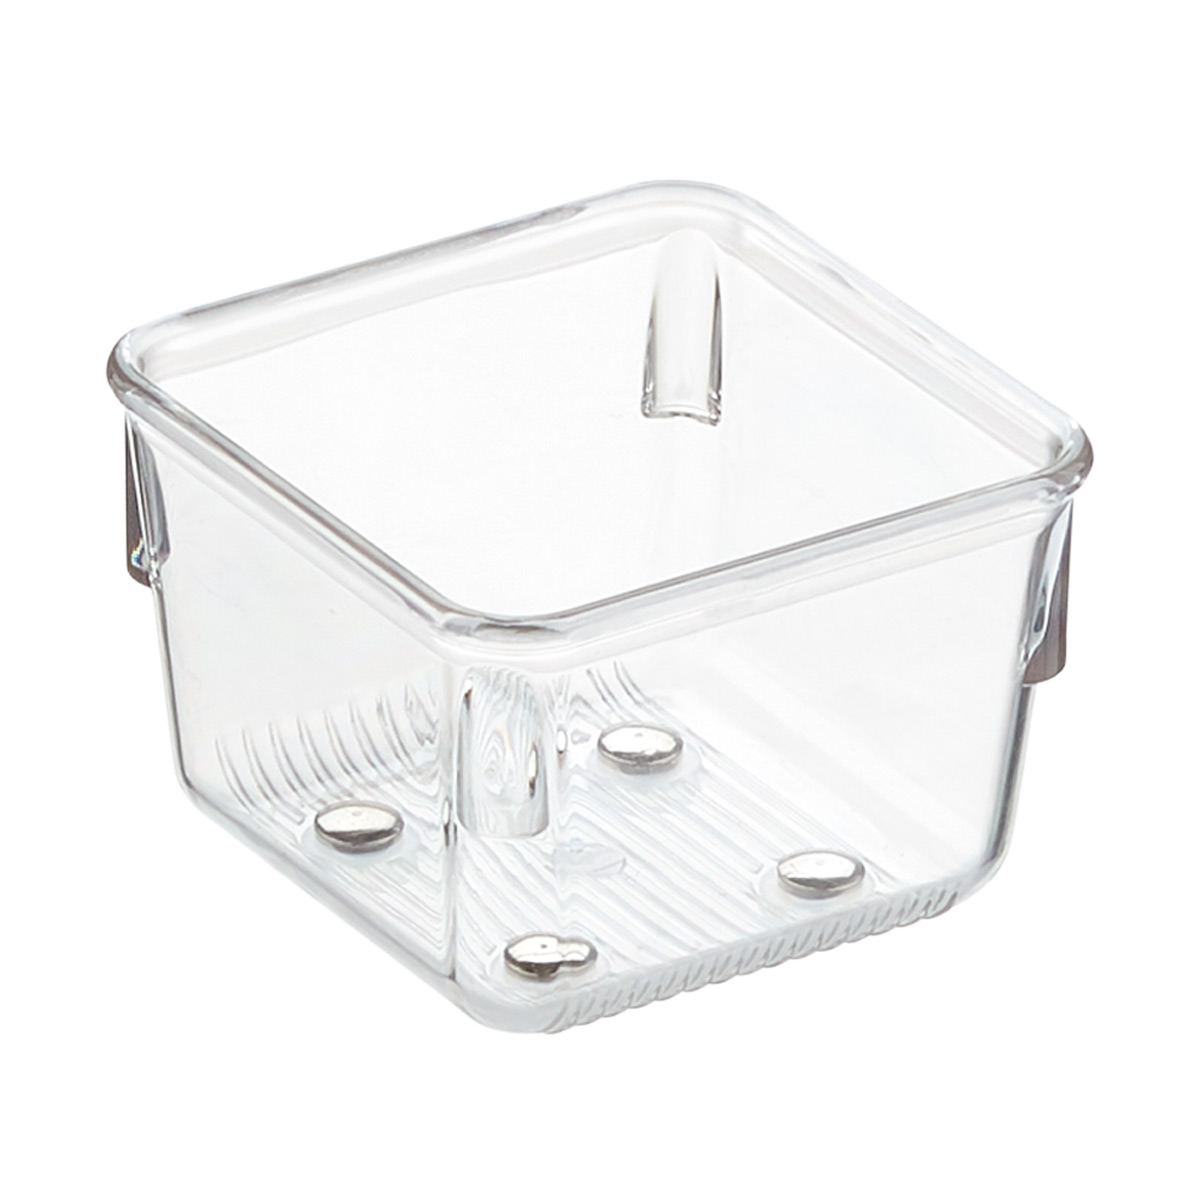 https://www.containerstore.com/catalogimages/348691/10036925-linus-shallow-drawer-organi.jpg